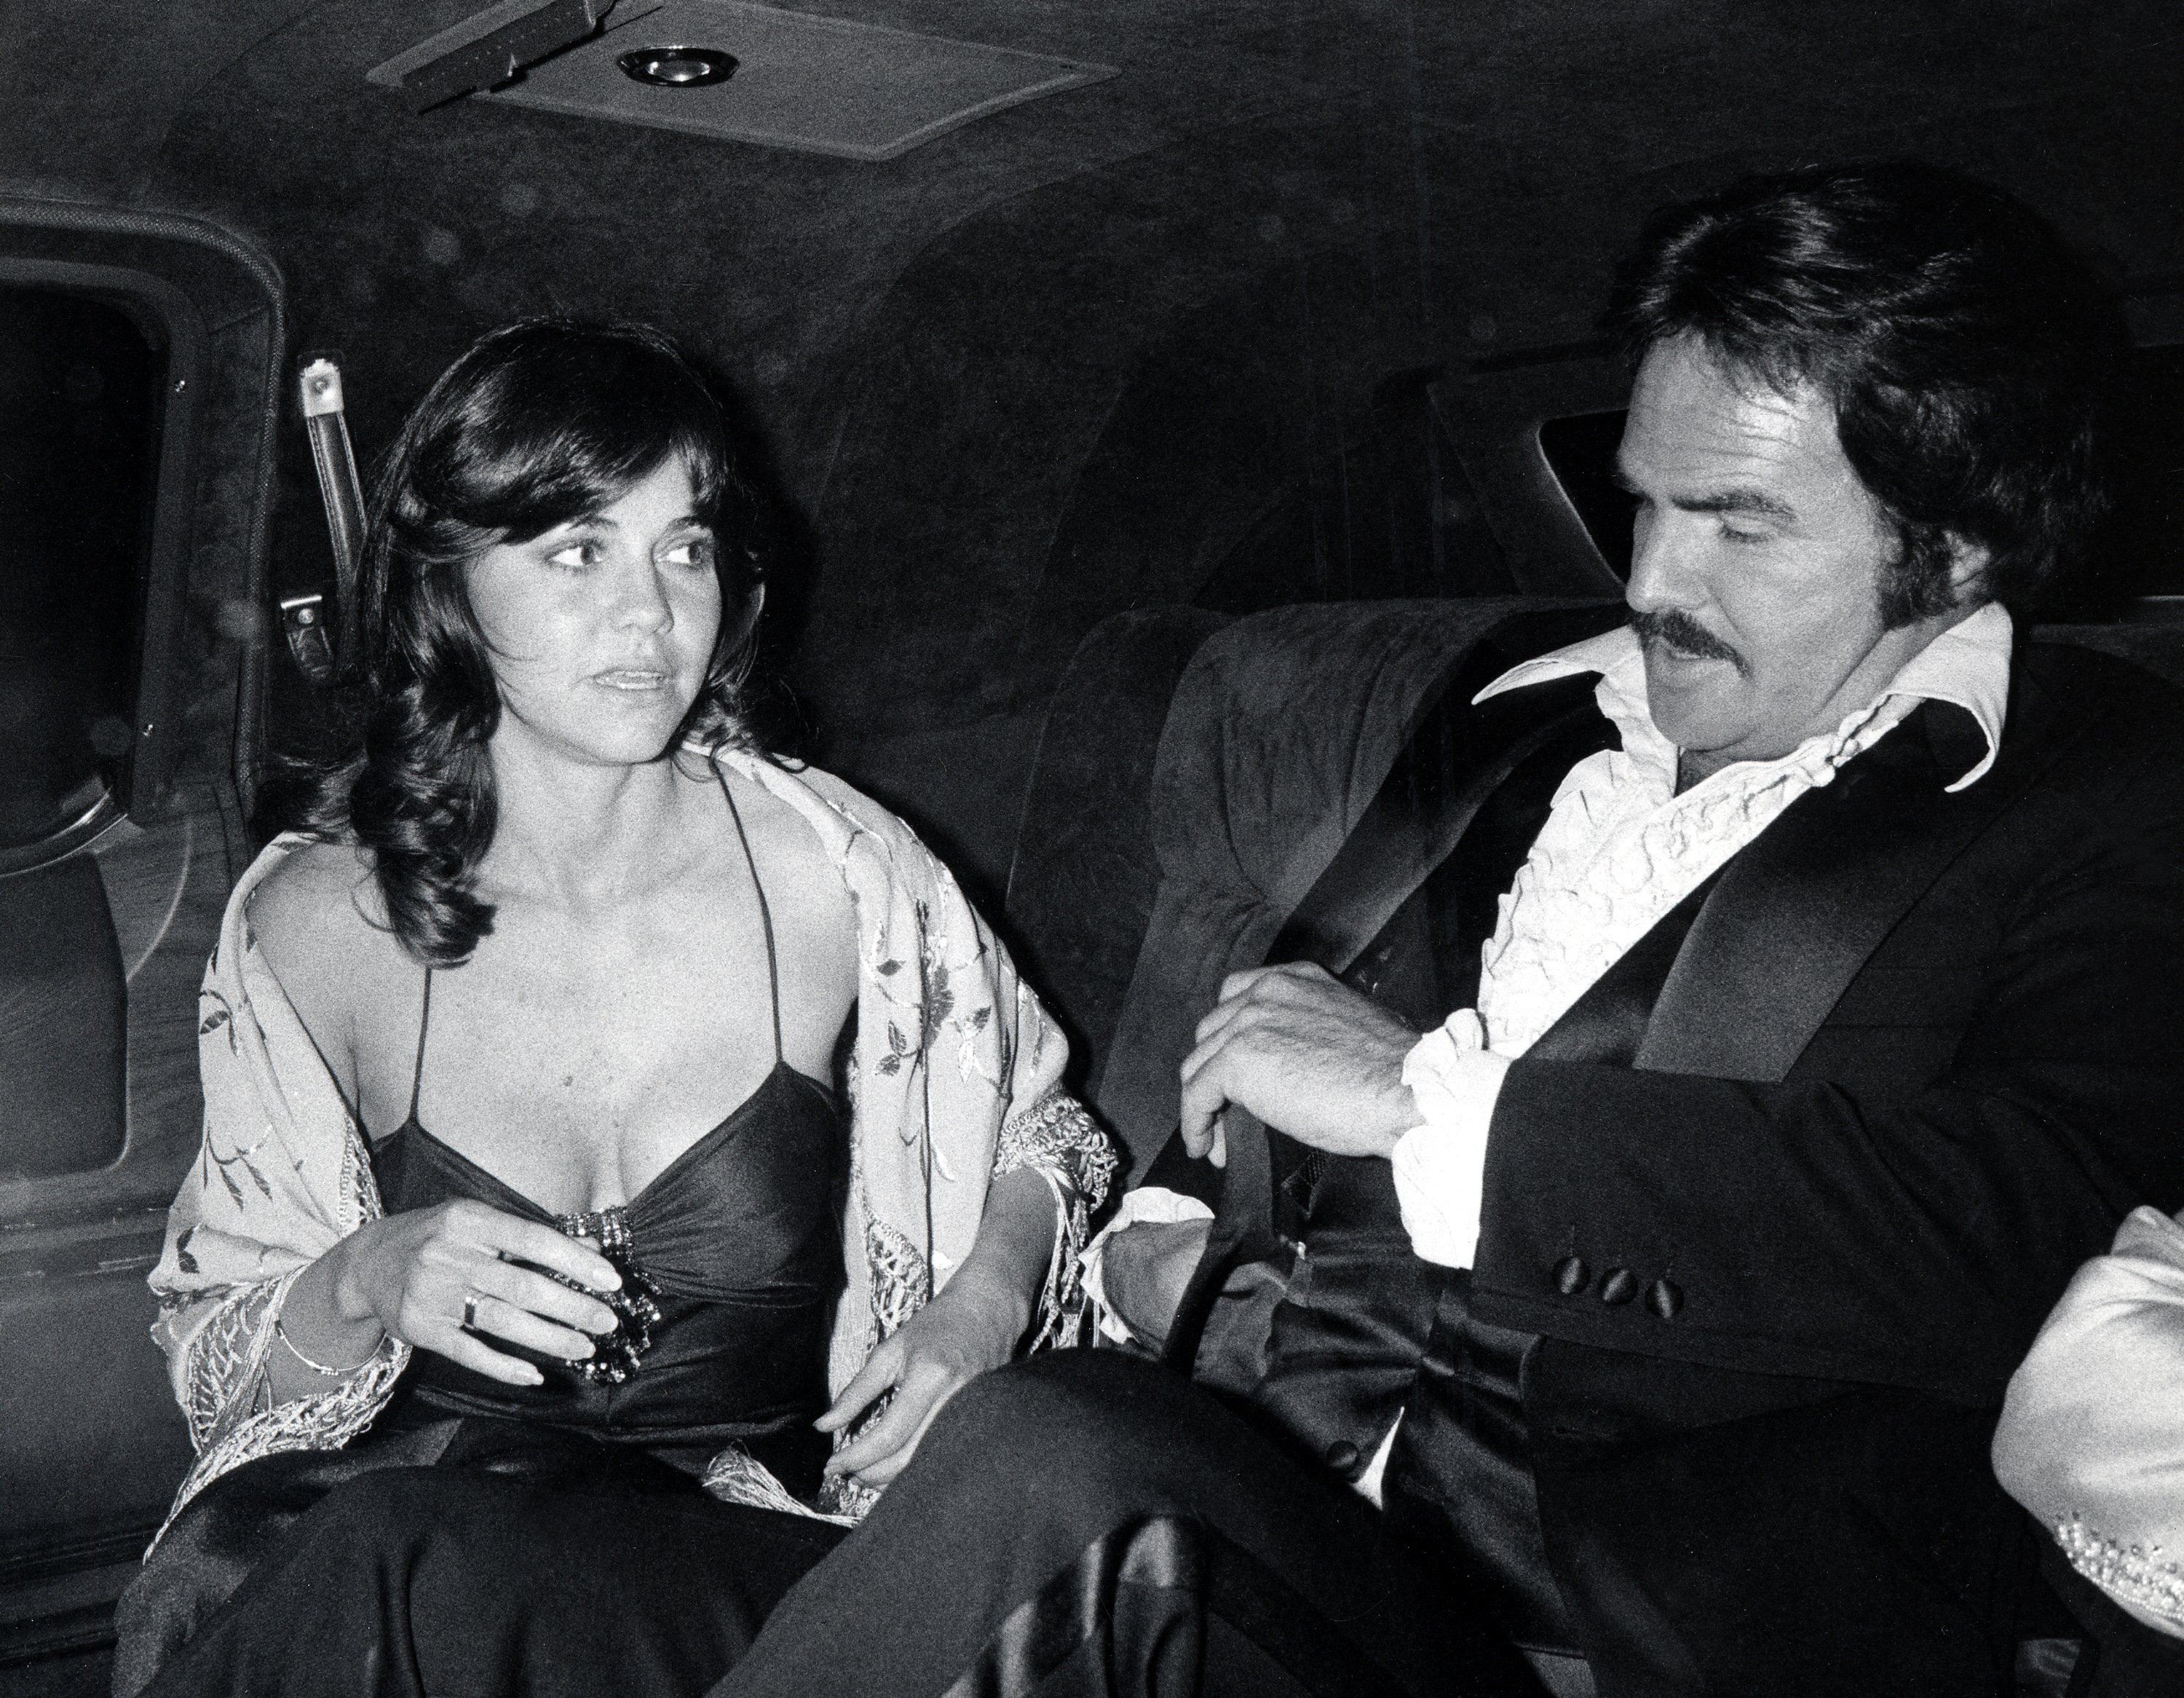 Burt Reynolds and Sally Field at the Los Angeles Television Critics Awards | Source: Getty Images